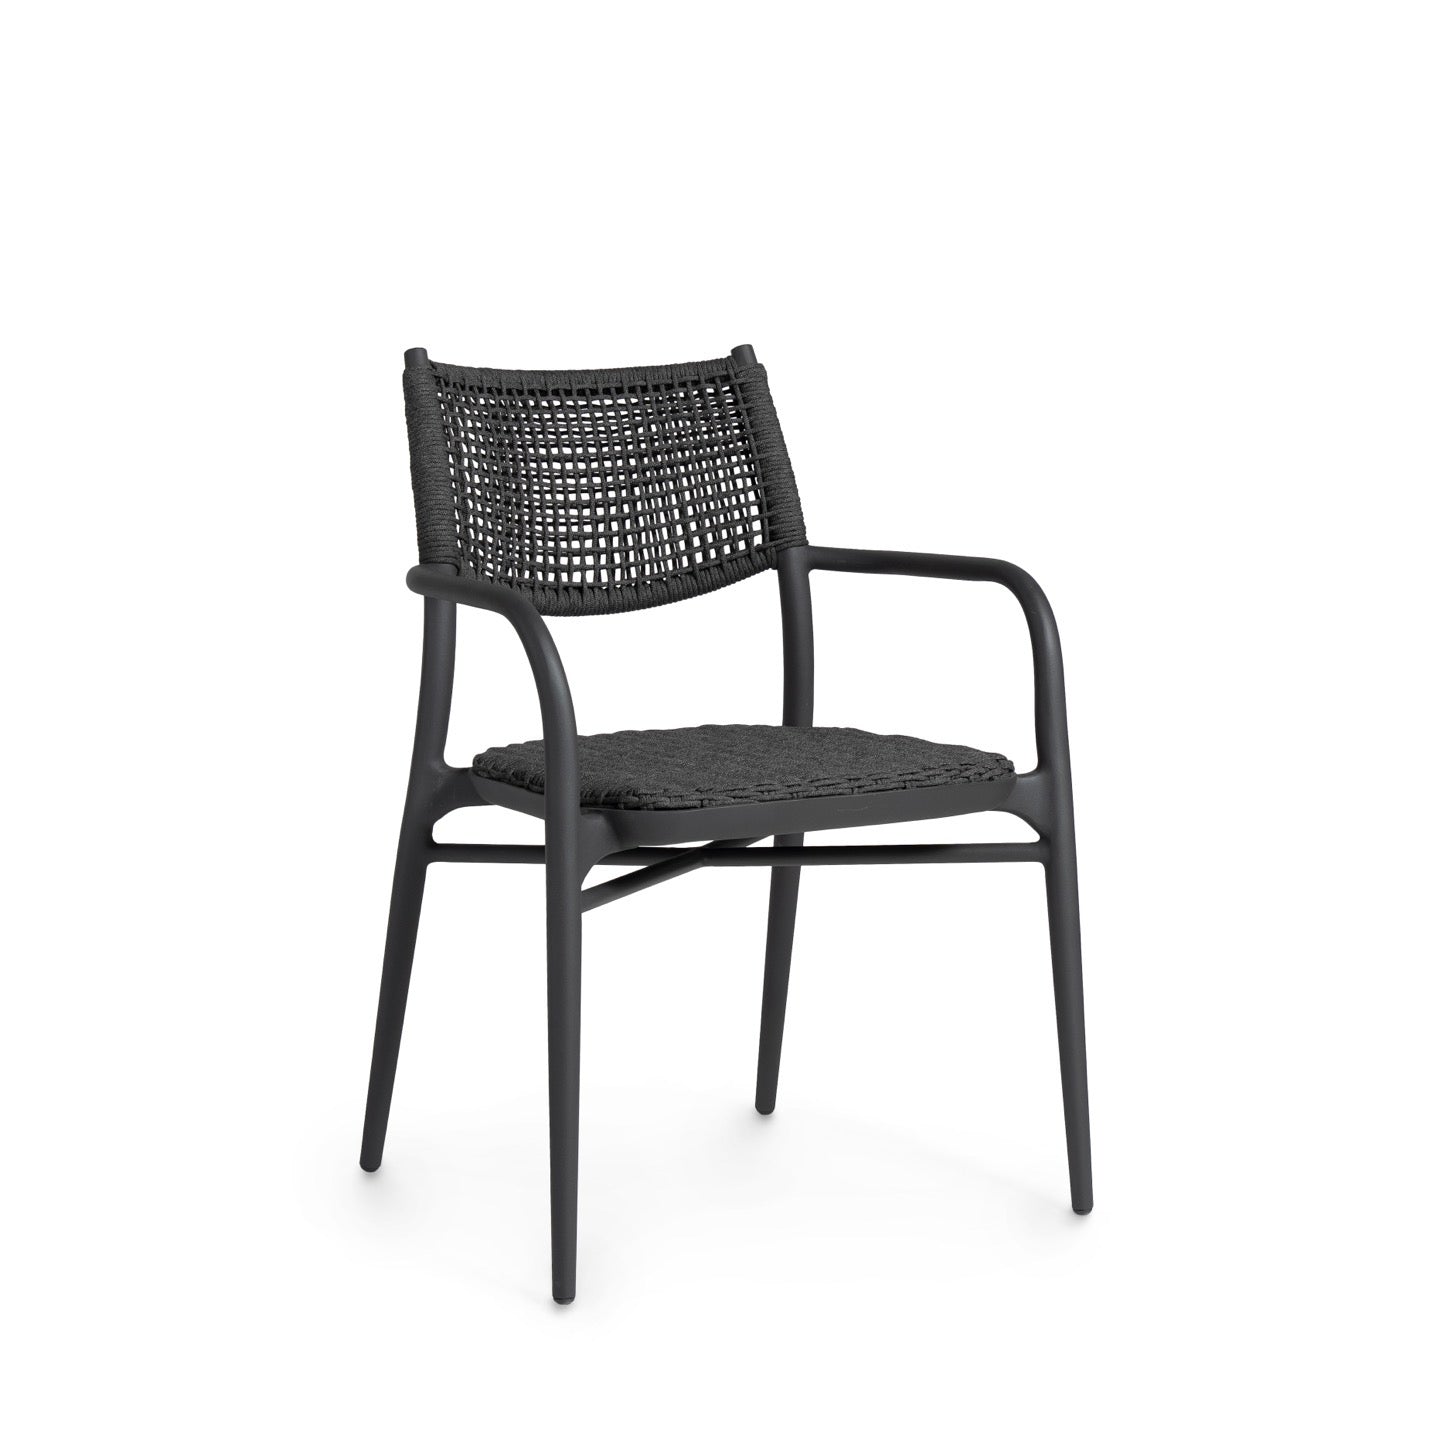 Cody Outdoor Stackable Arm Chair Midnight